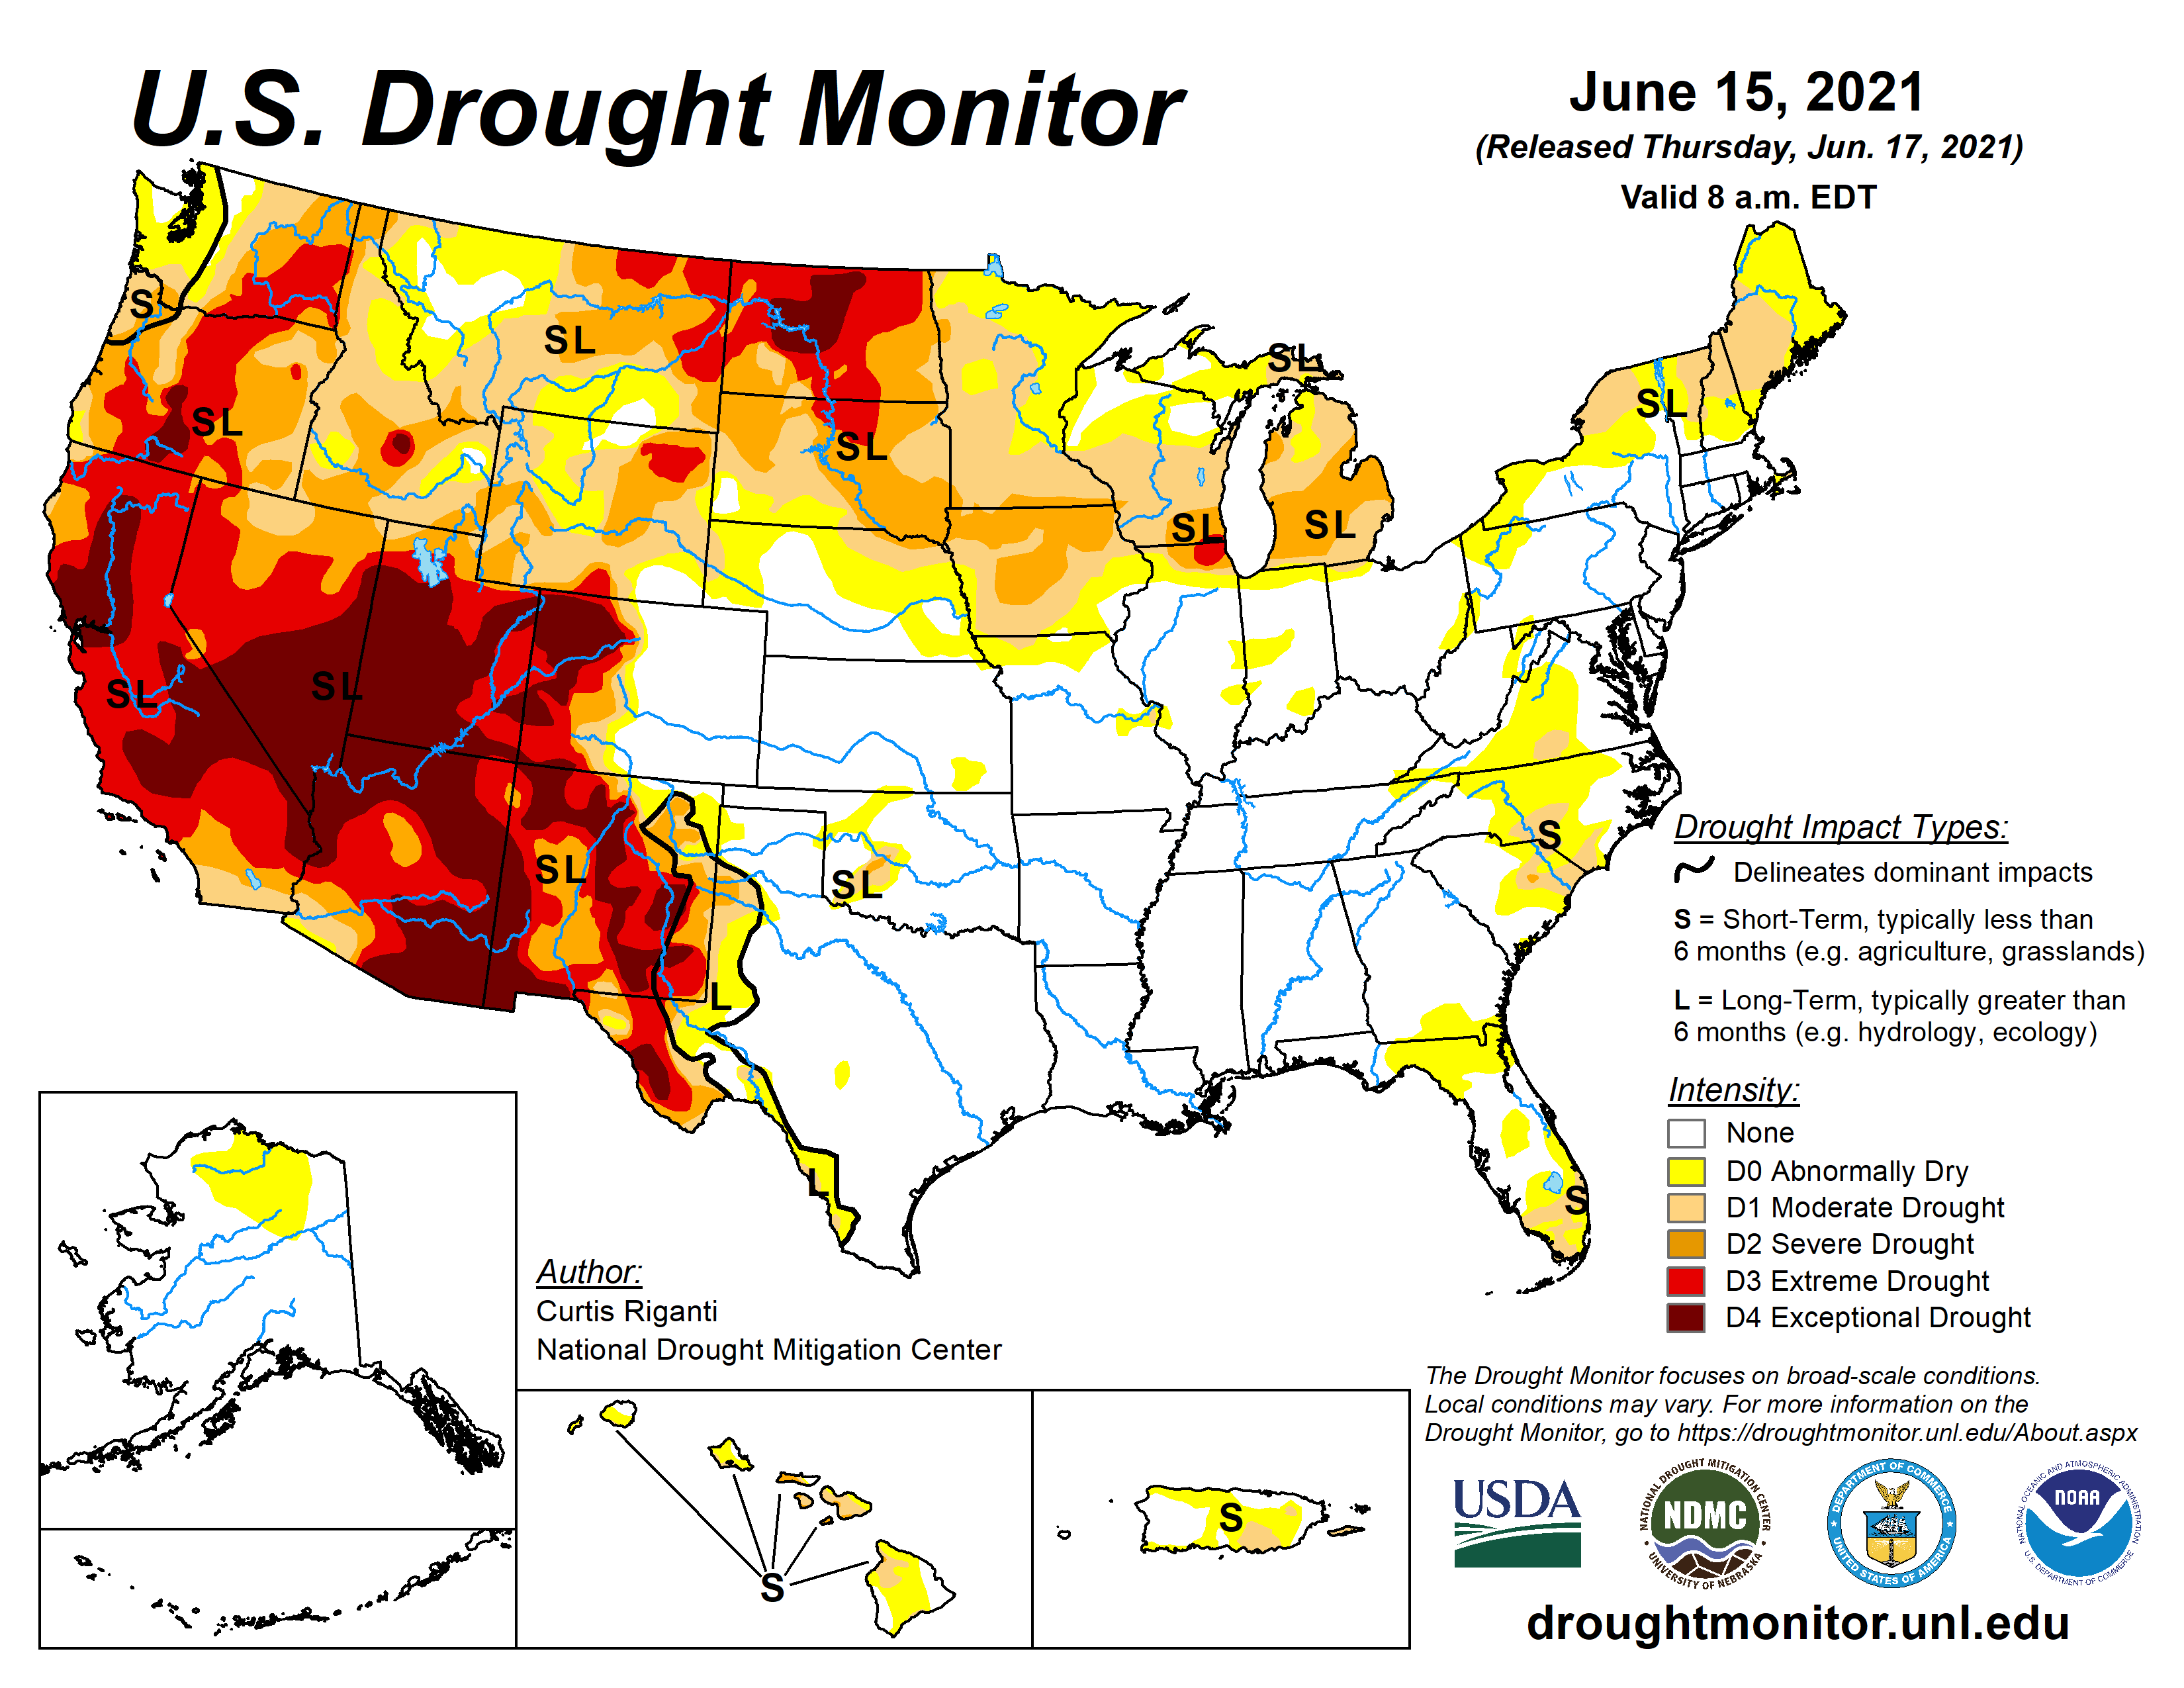 Figure 1. US Drought Monitor map released 17 June 2021 representing conditions as of 15 June 2021.